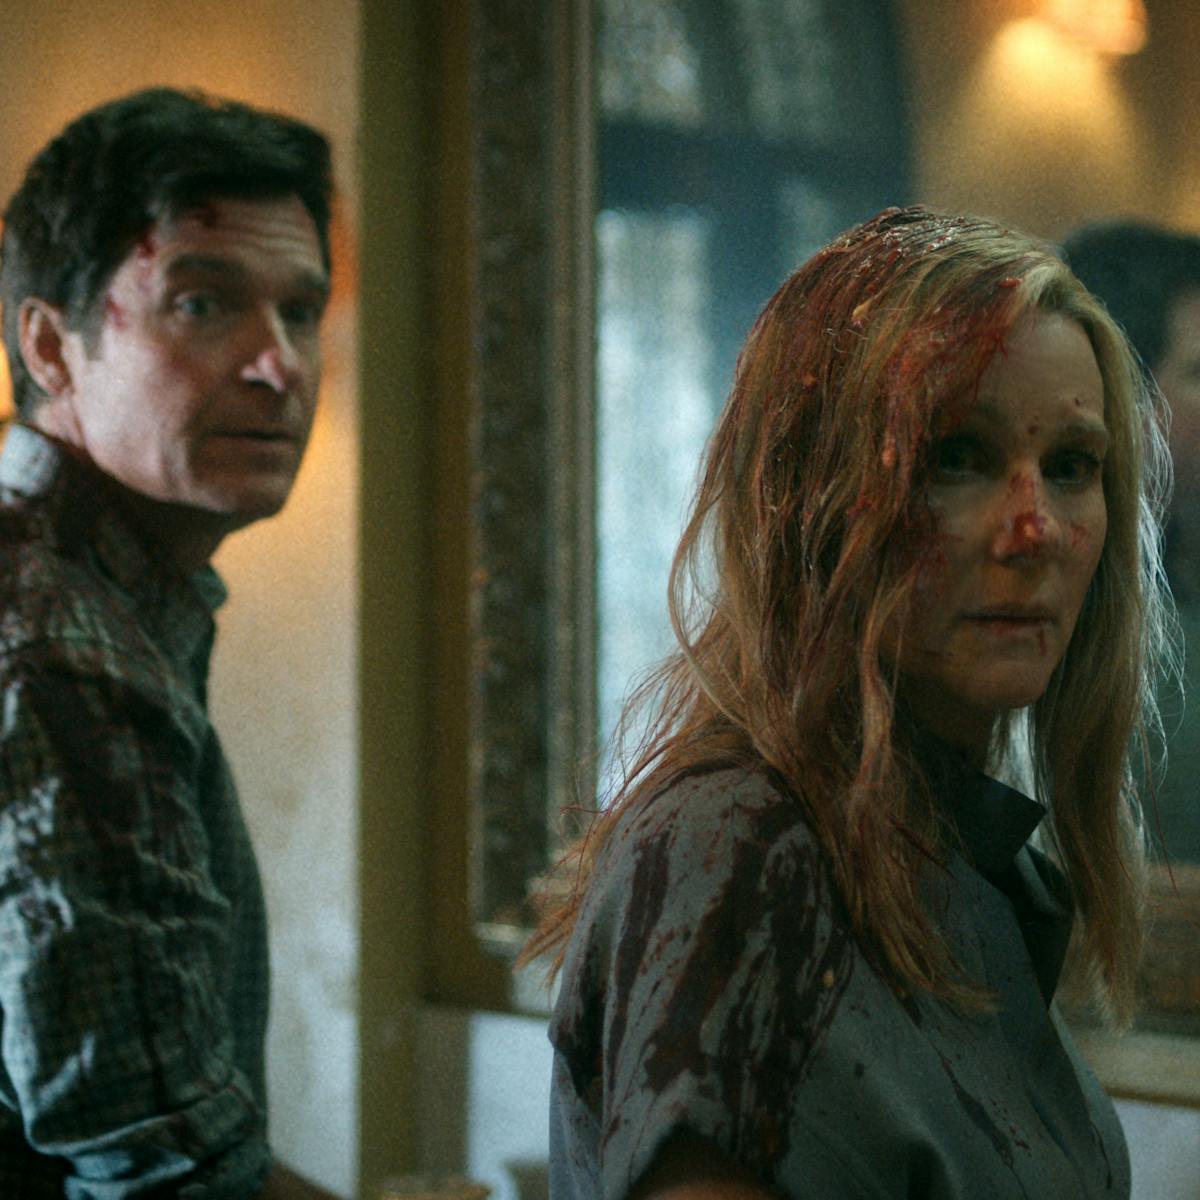 Jason Bateman and Laura Linney wear grey shirts and are covered in blood. Behind them is a big mirror.